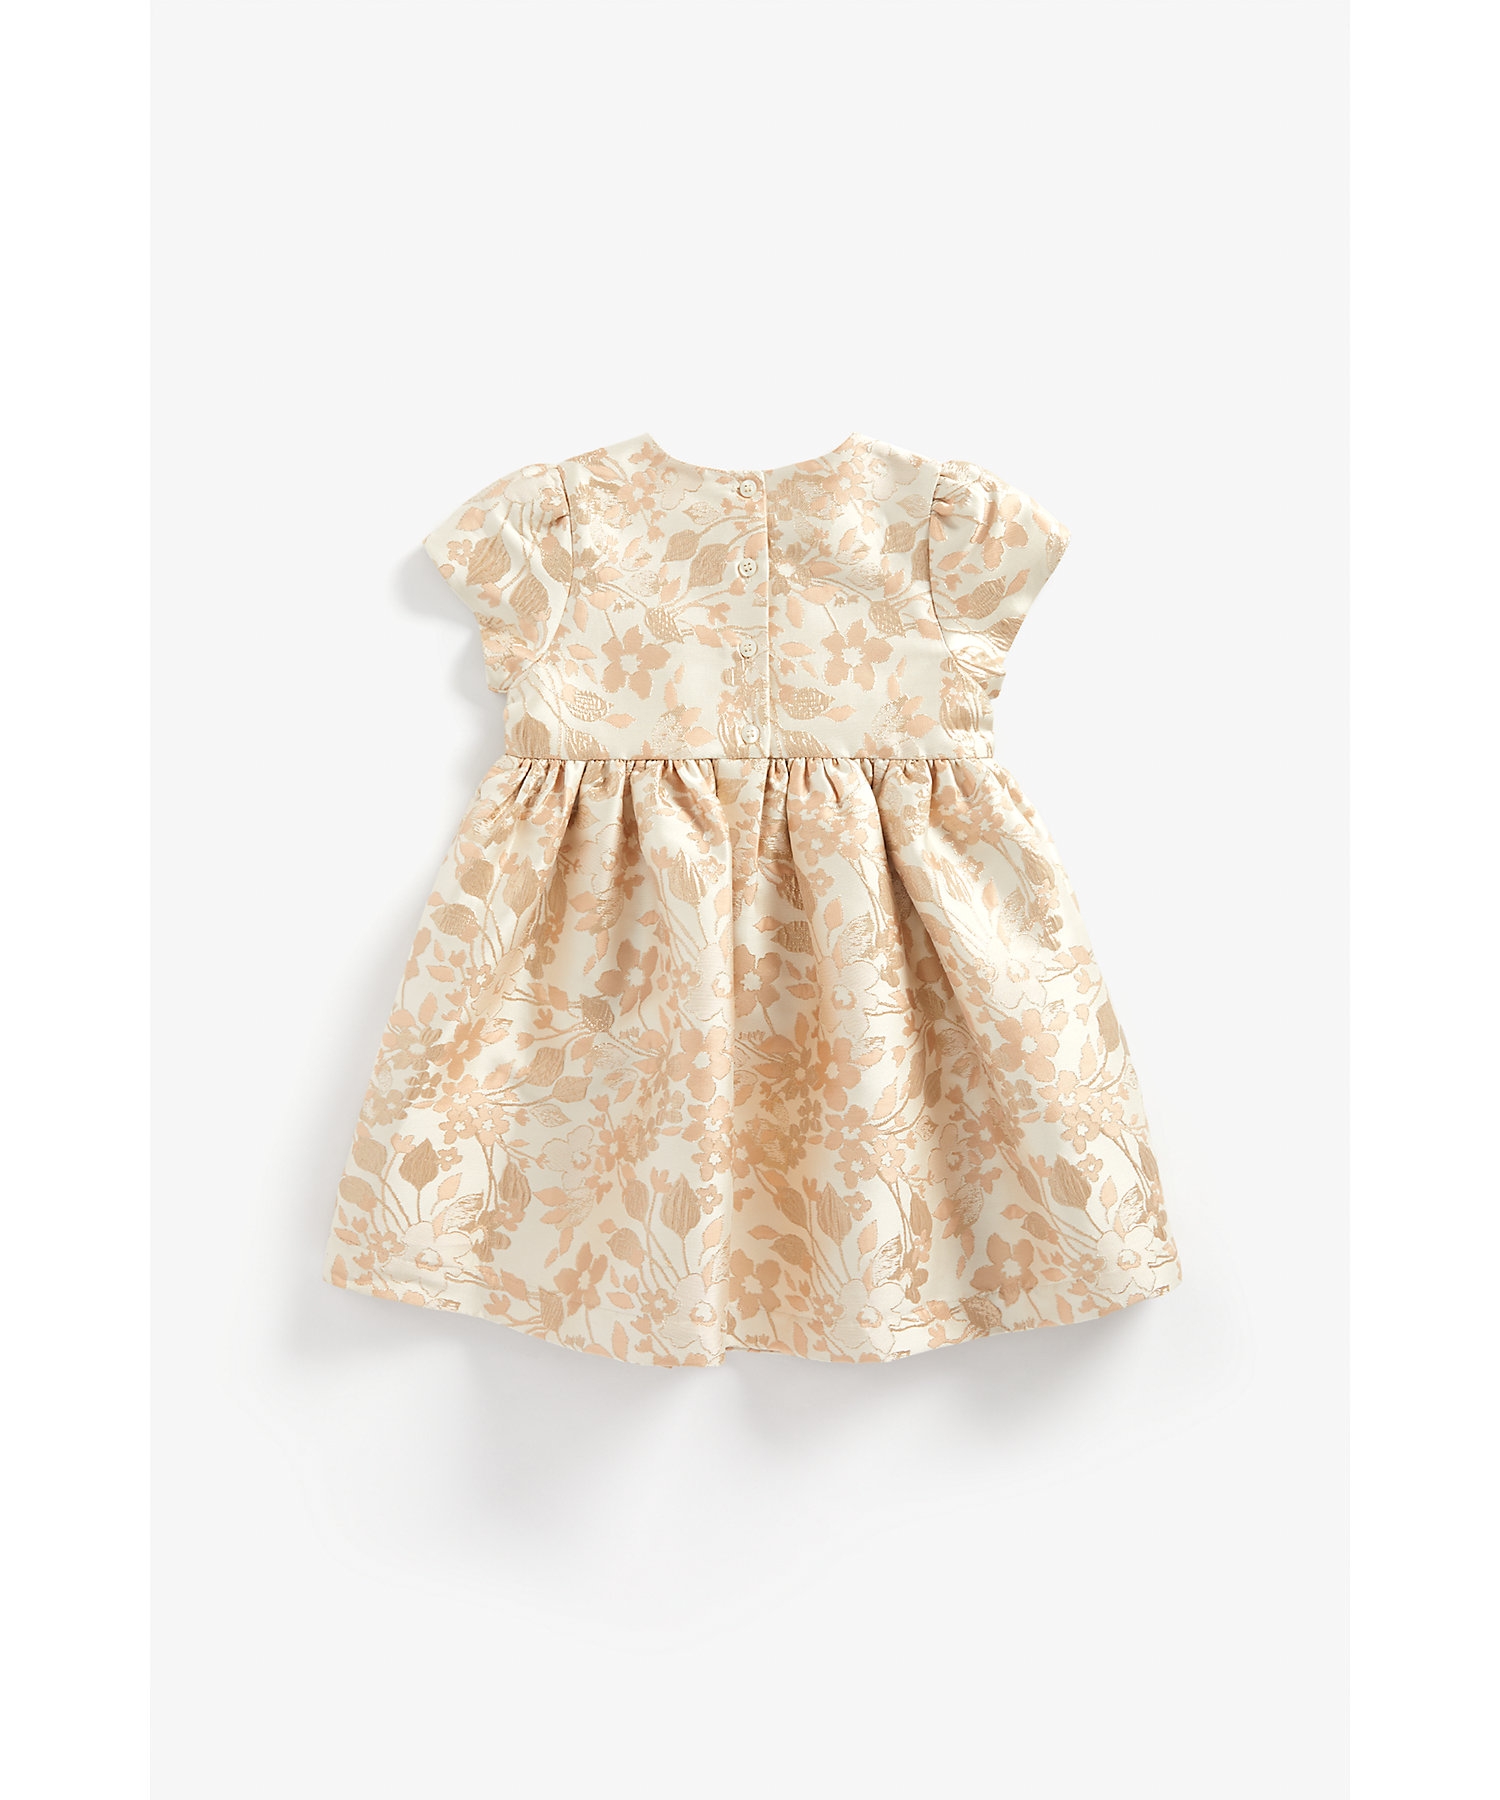 Girls Half Sleeves Jacquard Party Dress Bow Detail - Beige